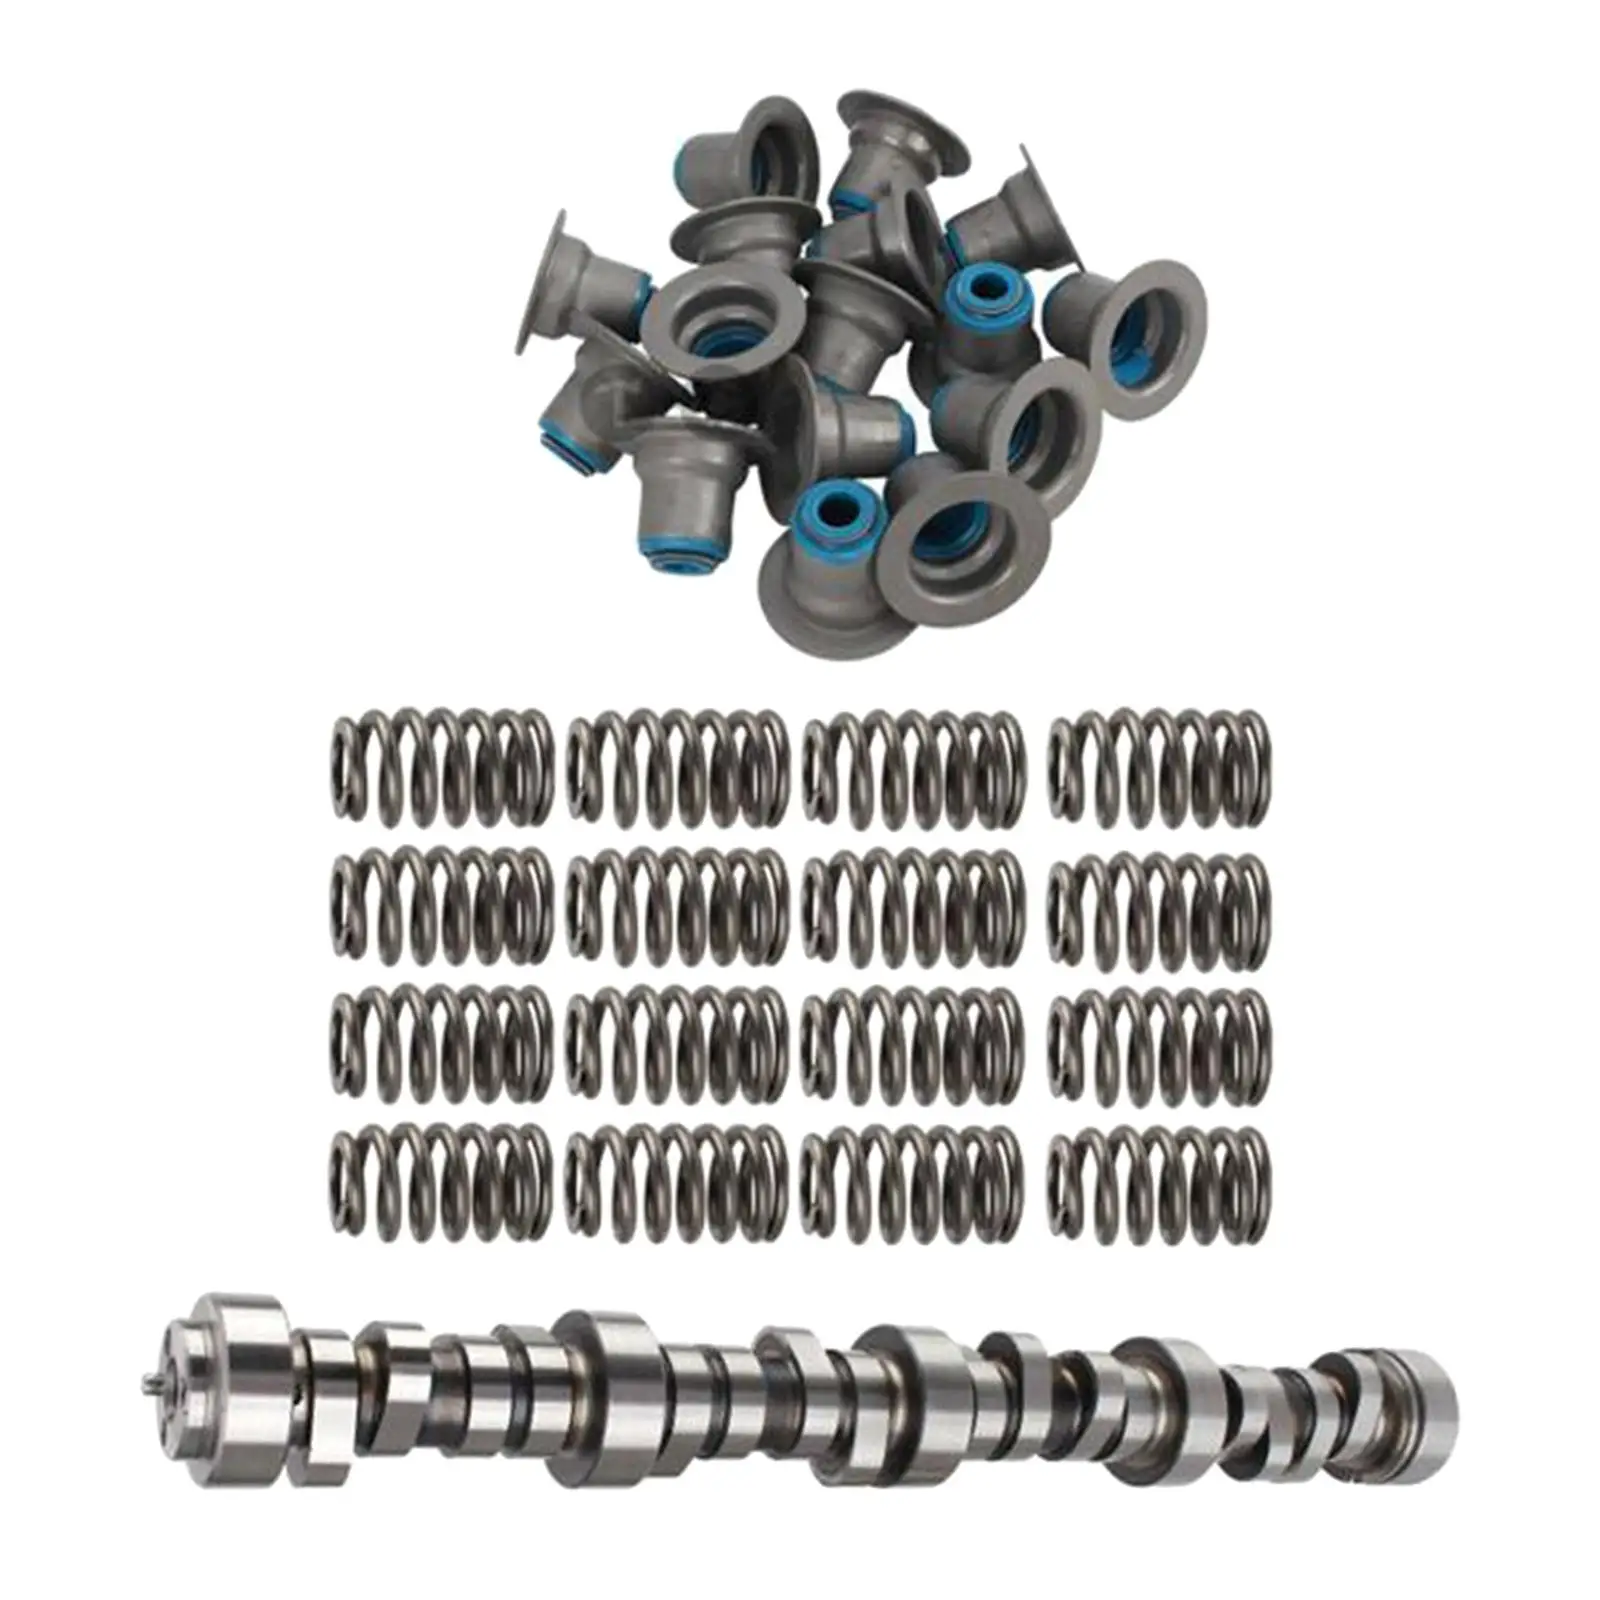 cam Kit Btr31218110 Accessory High Quality Durable Metal Camshaft Kit Replacement for Silverado Stage 2 4.8L 5.3L 6.0L 6.2L